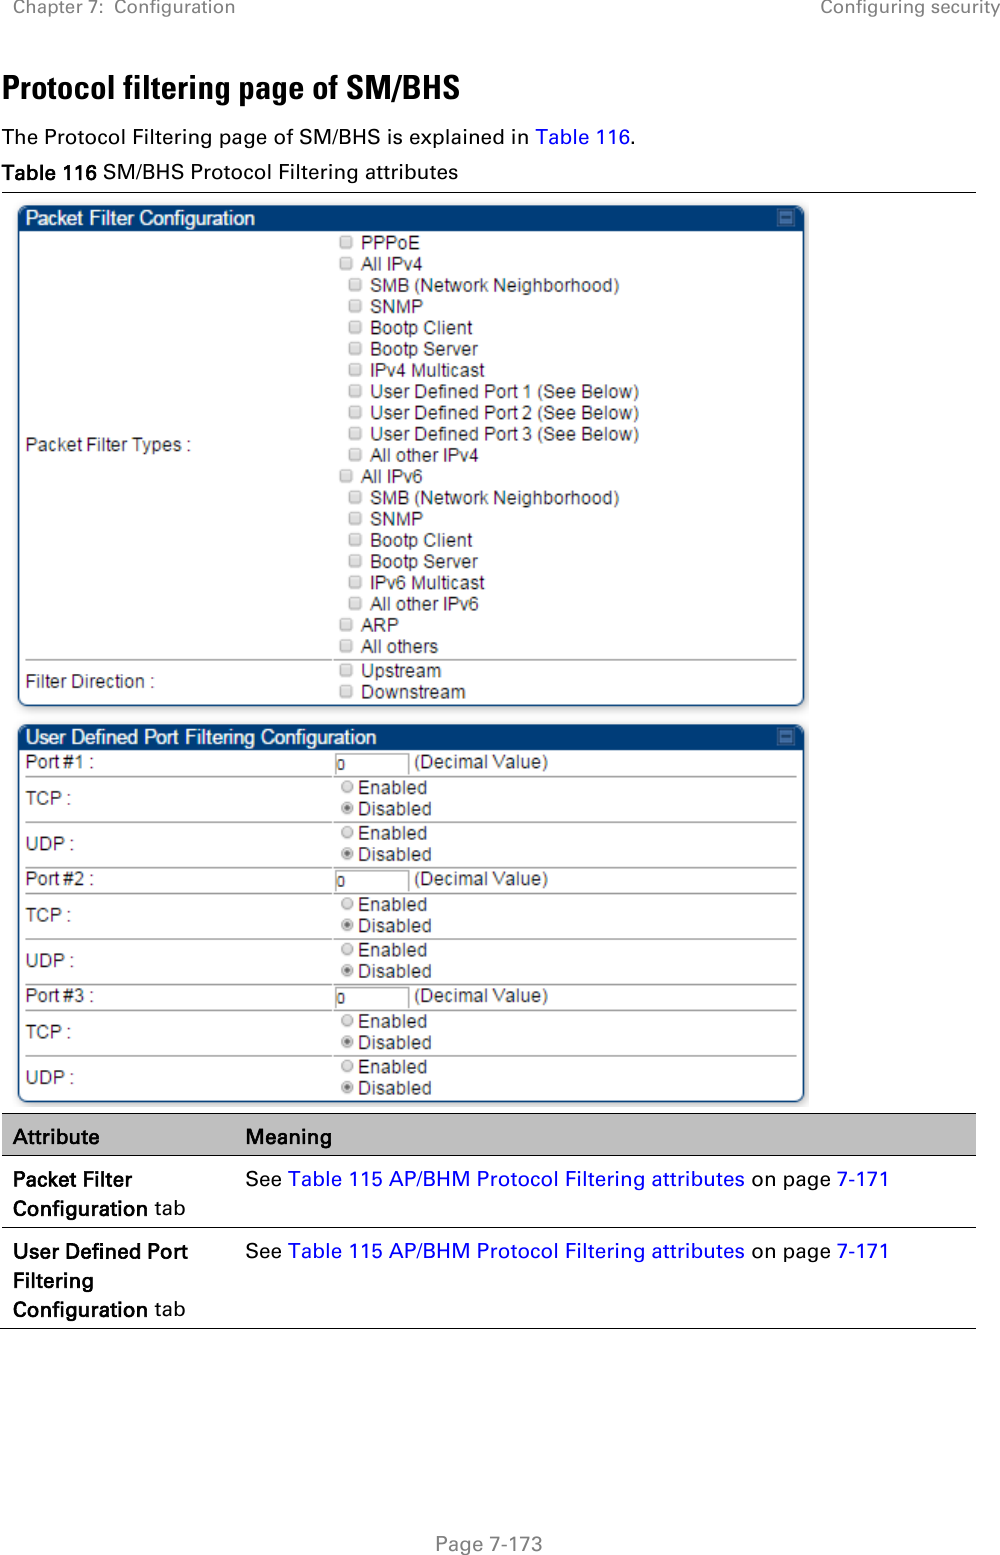 Chapter 7:  Configuration Configuring security   Page 7-173 Protocol filtering page of SM/BHS The Protocol Filtering page of SM/BHS is explained in Table 116. Table 116 SM/BHS Protocol Filtering attributes  Attribute Meaning Packet Filter Configuration tab See Table 115 AP/BHM Protocol Filtering attributes on page 7-171 User Defined Port Filtering Configuration tab See Table 115 AP/BHM Protocol Filtering attributes on page 7-171  